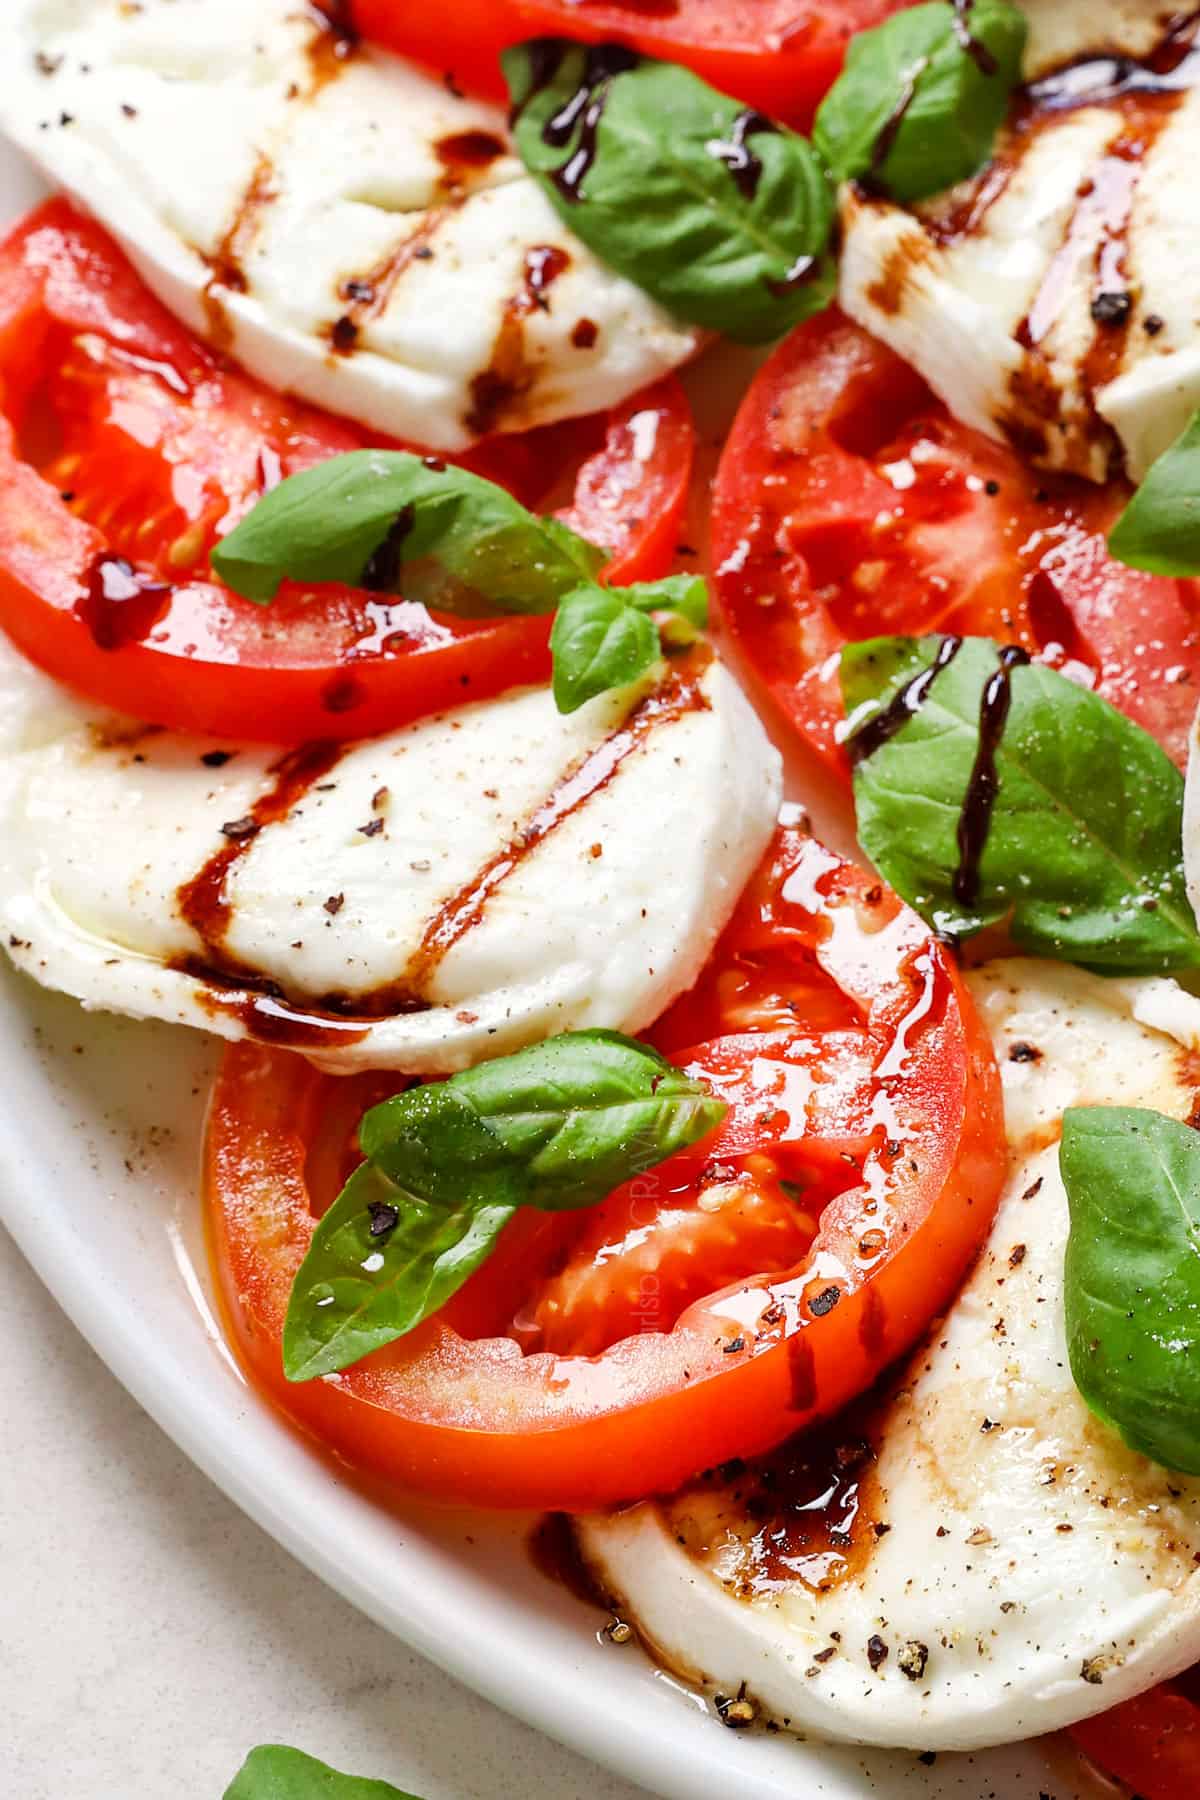 up close of Caprese Salad with tomatoes and mozzarella slices showing how thick the slices are